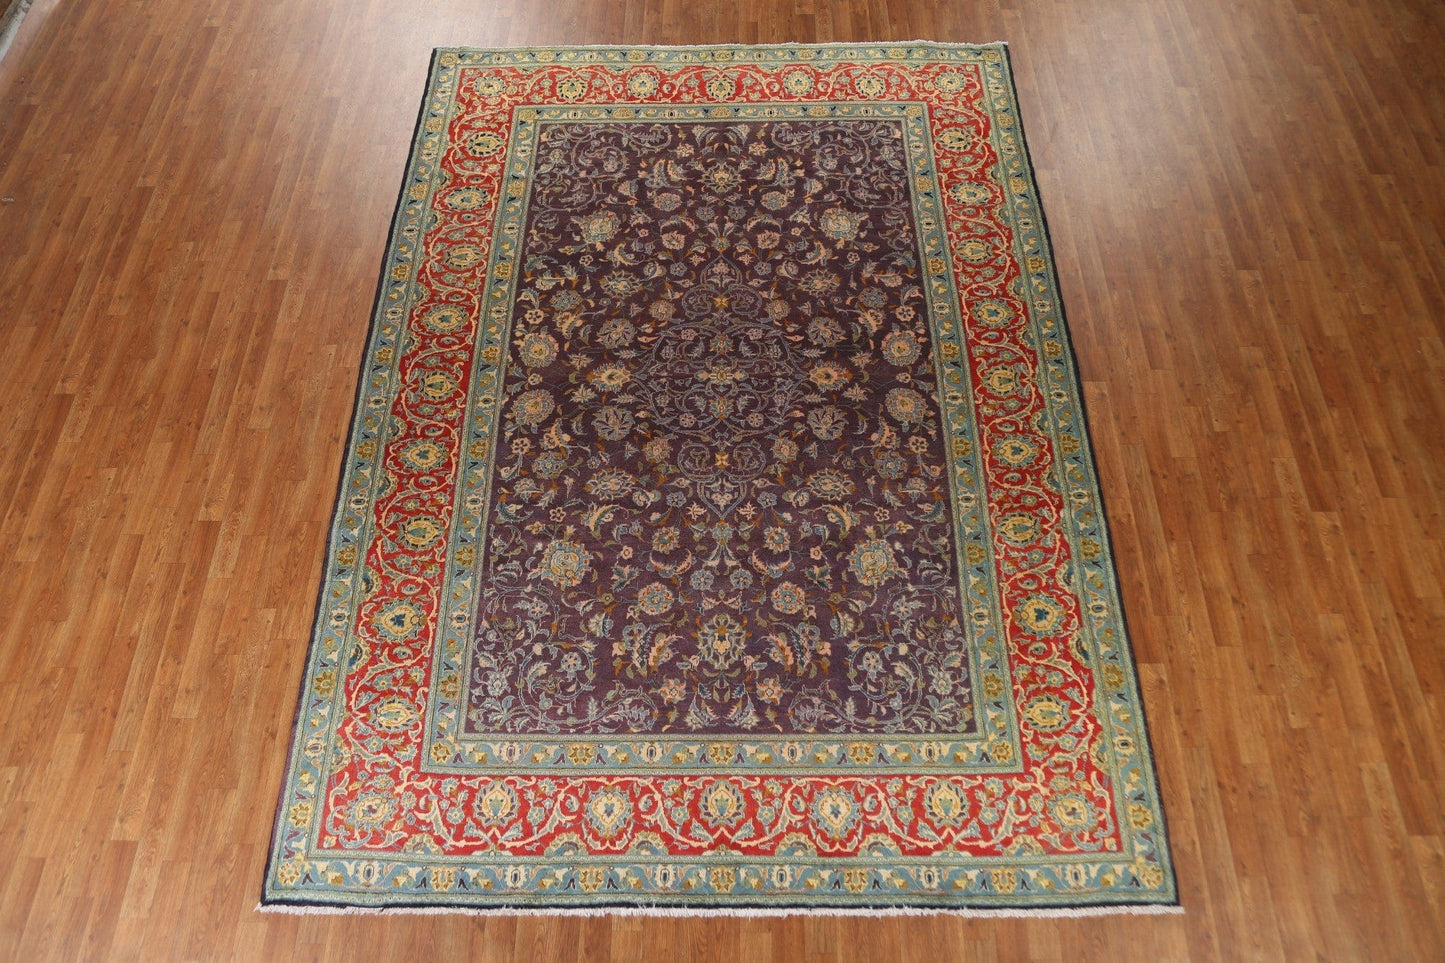 Vintage Floral Isfahan Persian Area Rug 8x11